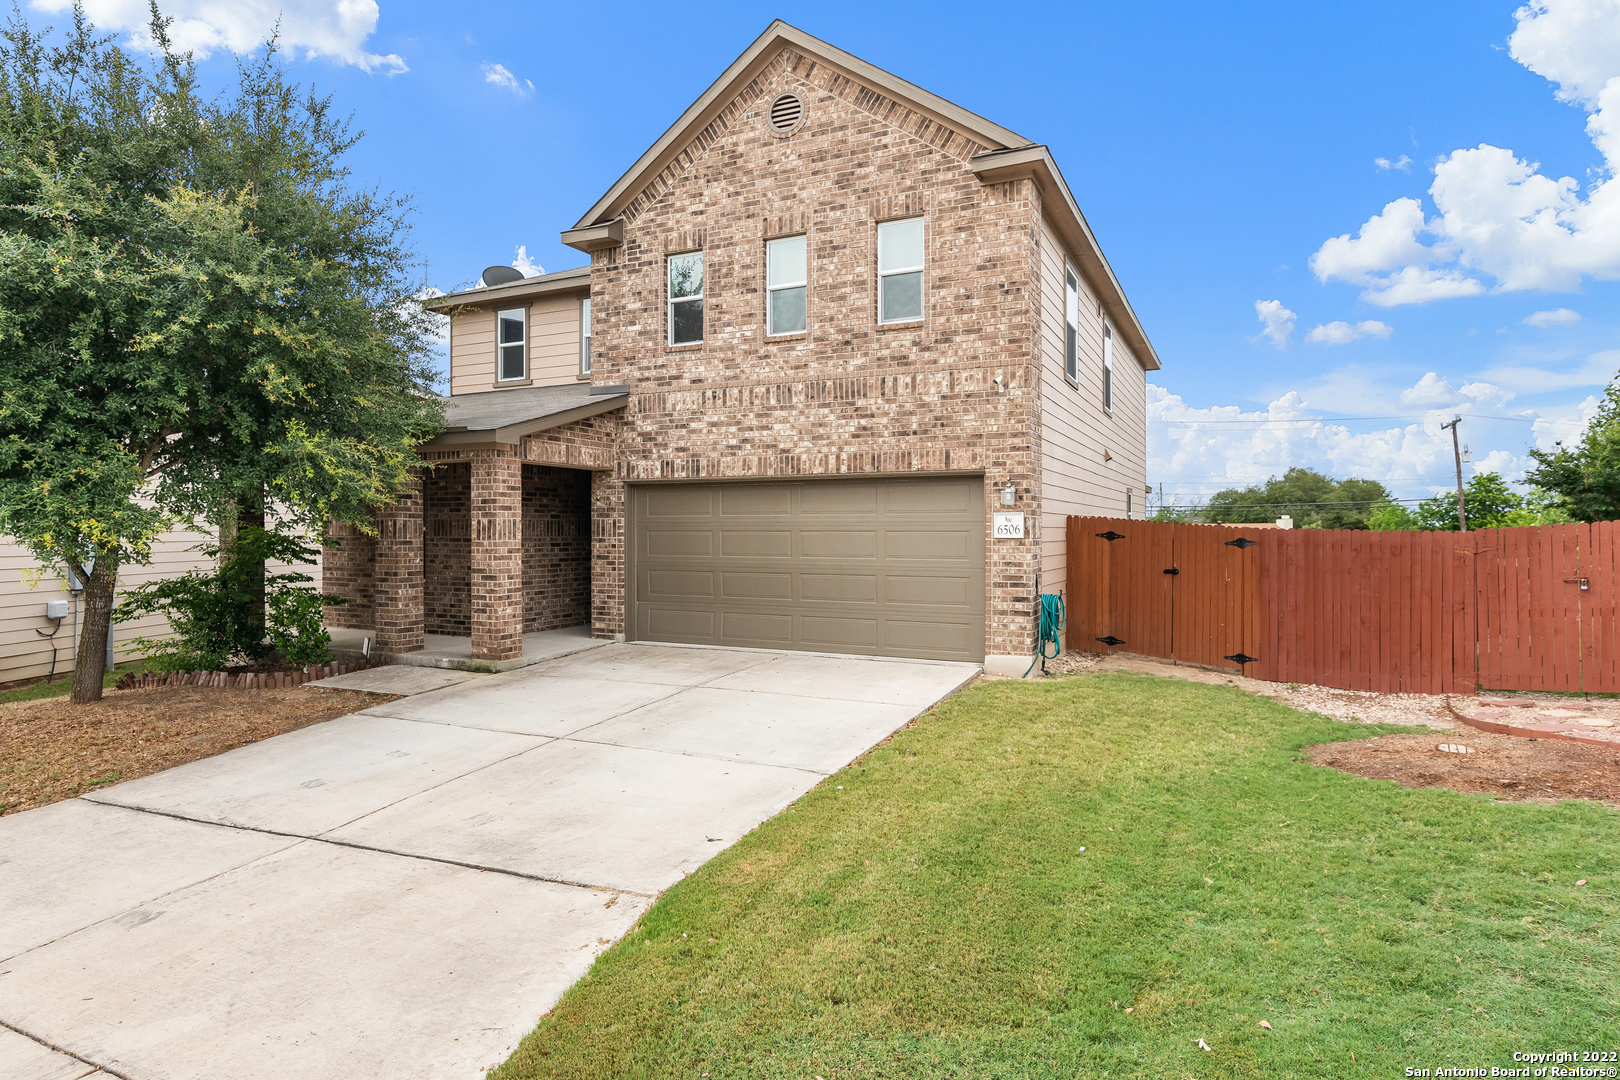 OPEN HOUSE 7/24 from 2-4 pm! LOCATION*LOCATION*LOCATION* Move in ready 3bd, 3ba, 2 car garage with a loft area and a office/study. Home features 2403 sqft, single family KB Home built in 2017 that is located in WINDCREST.